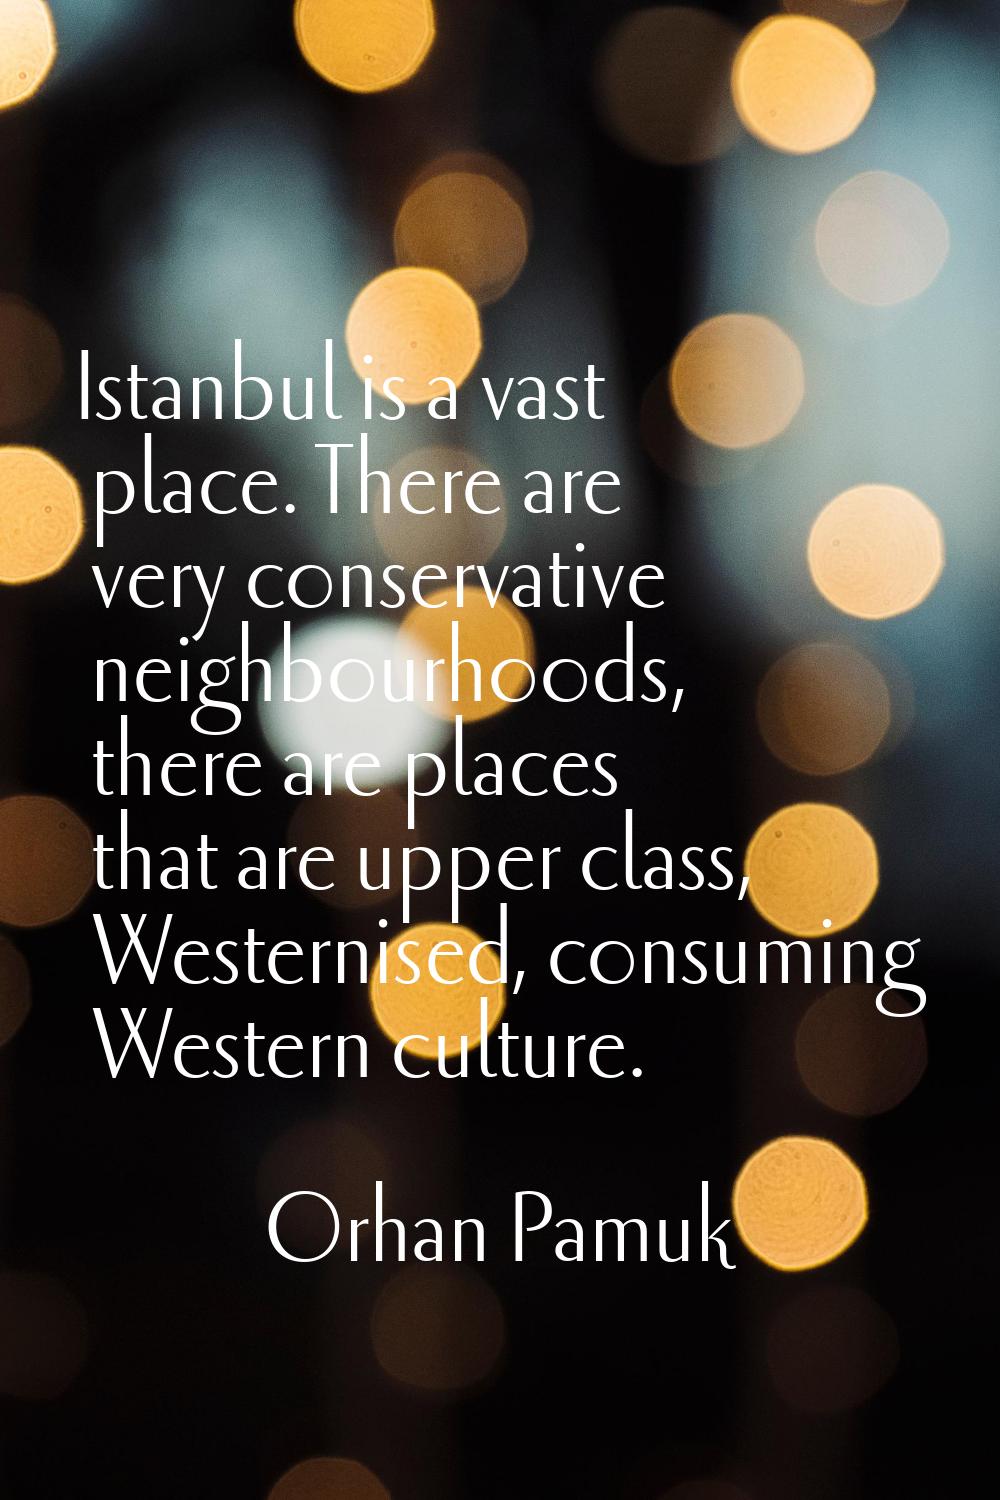 Istanbul is a vast place. There are very conservative neighbourhoods, there are places that are upp